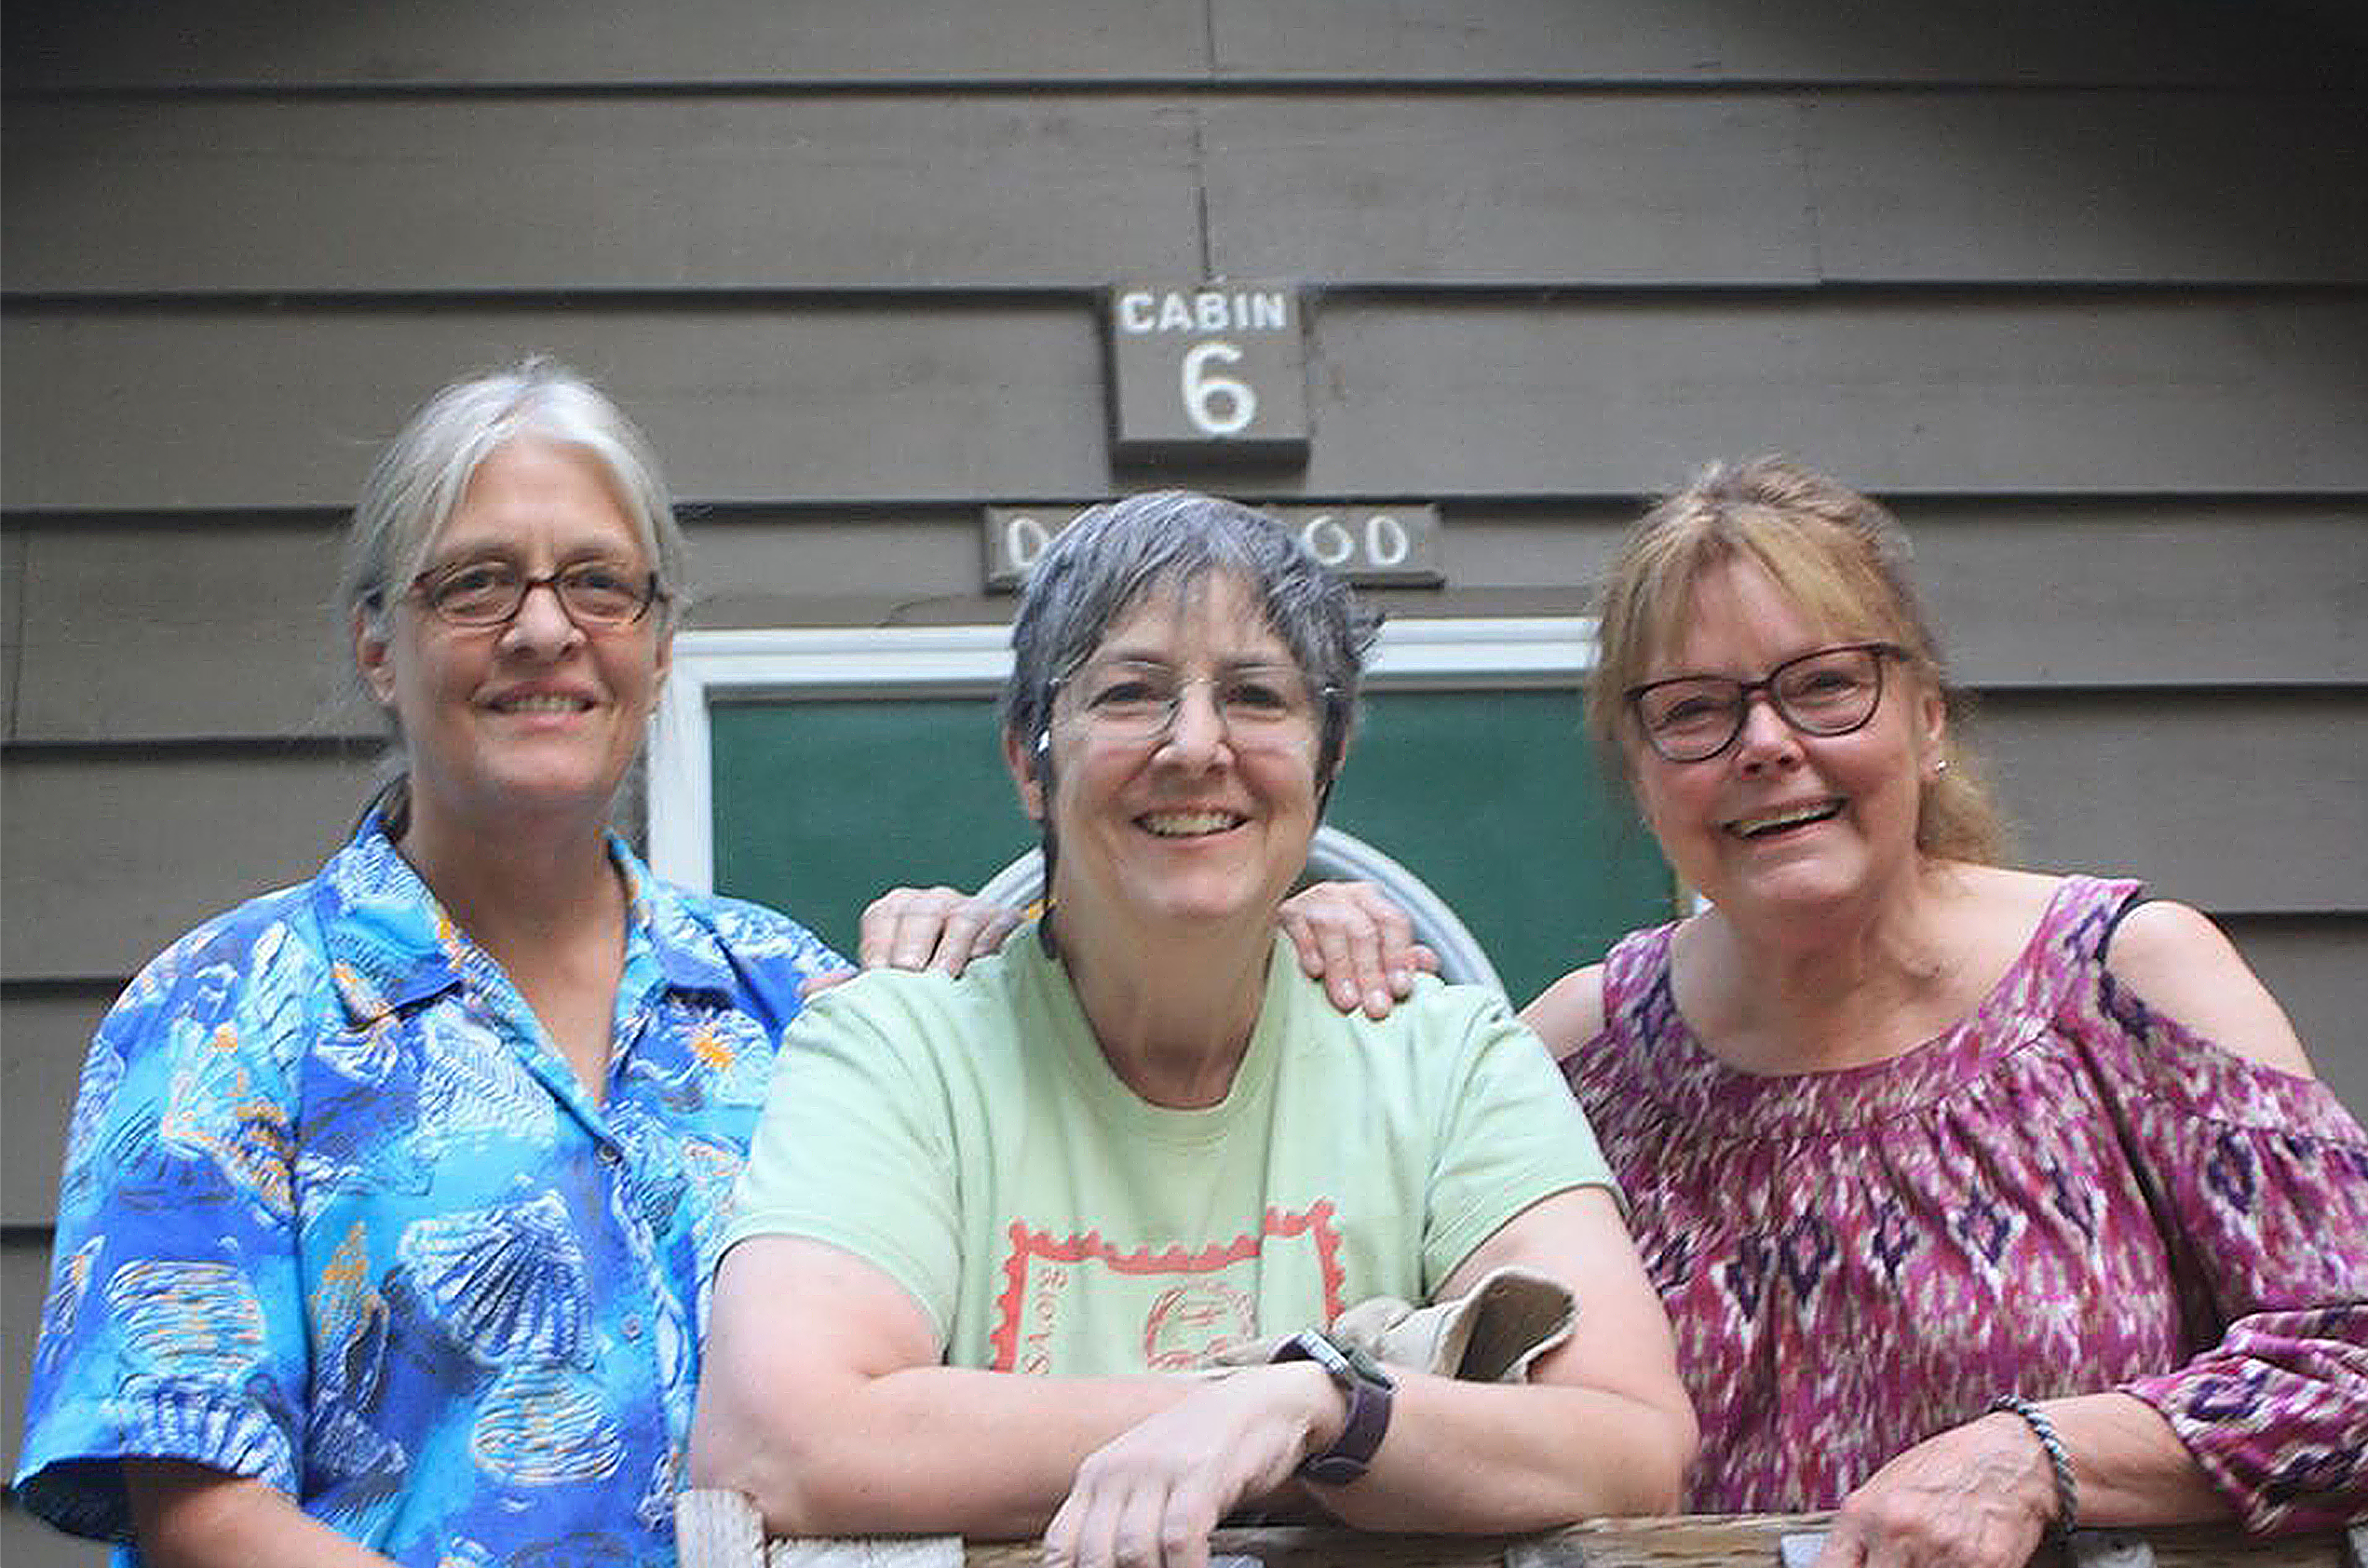 Roommates at Suttle Lake Camp Sheri Tangen and Renda Greene and Sue Quast